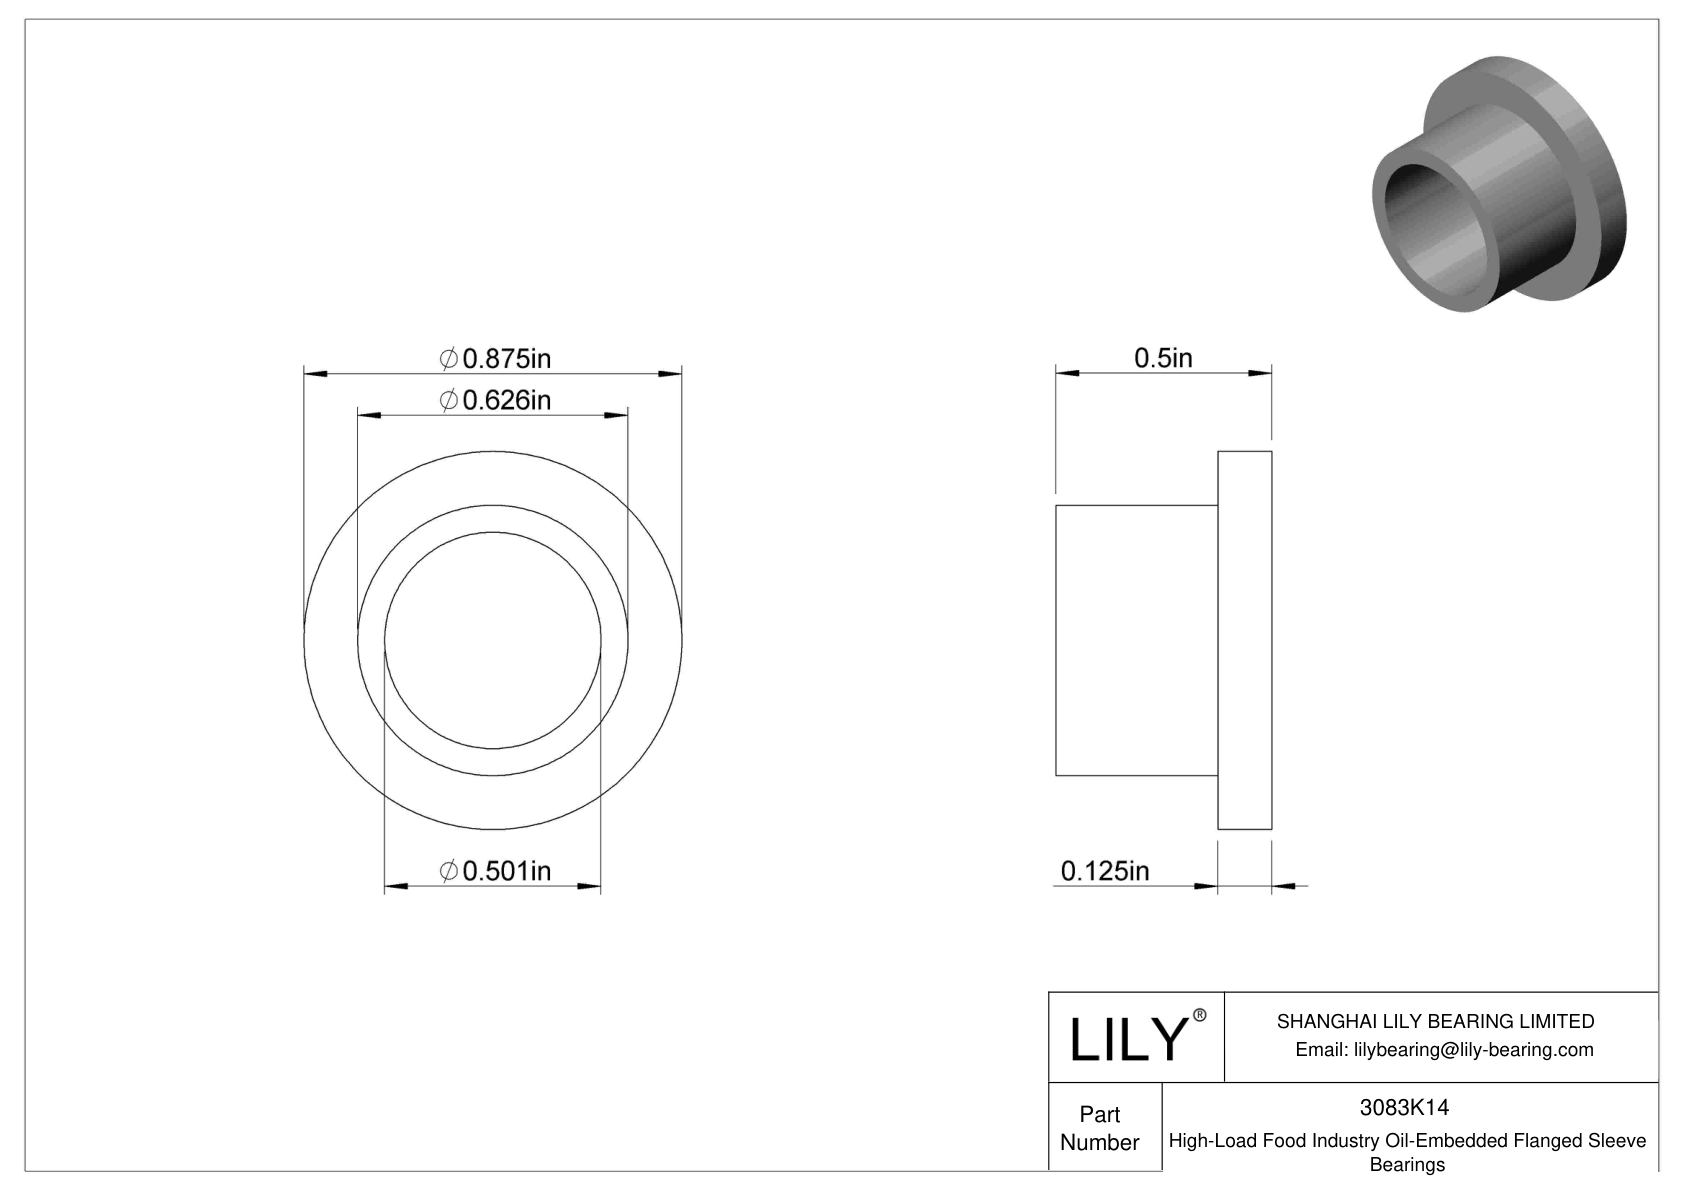 DAIDKBE High-Load Food Industry Oil-Embedded Flanged Sleeve Bearings cad drawing